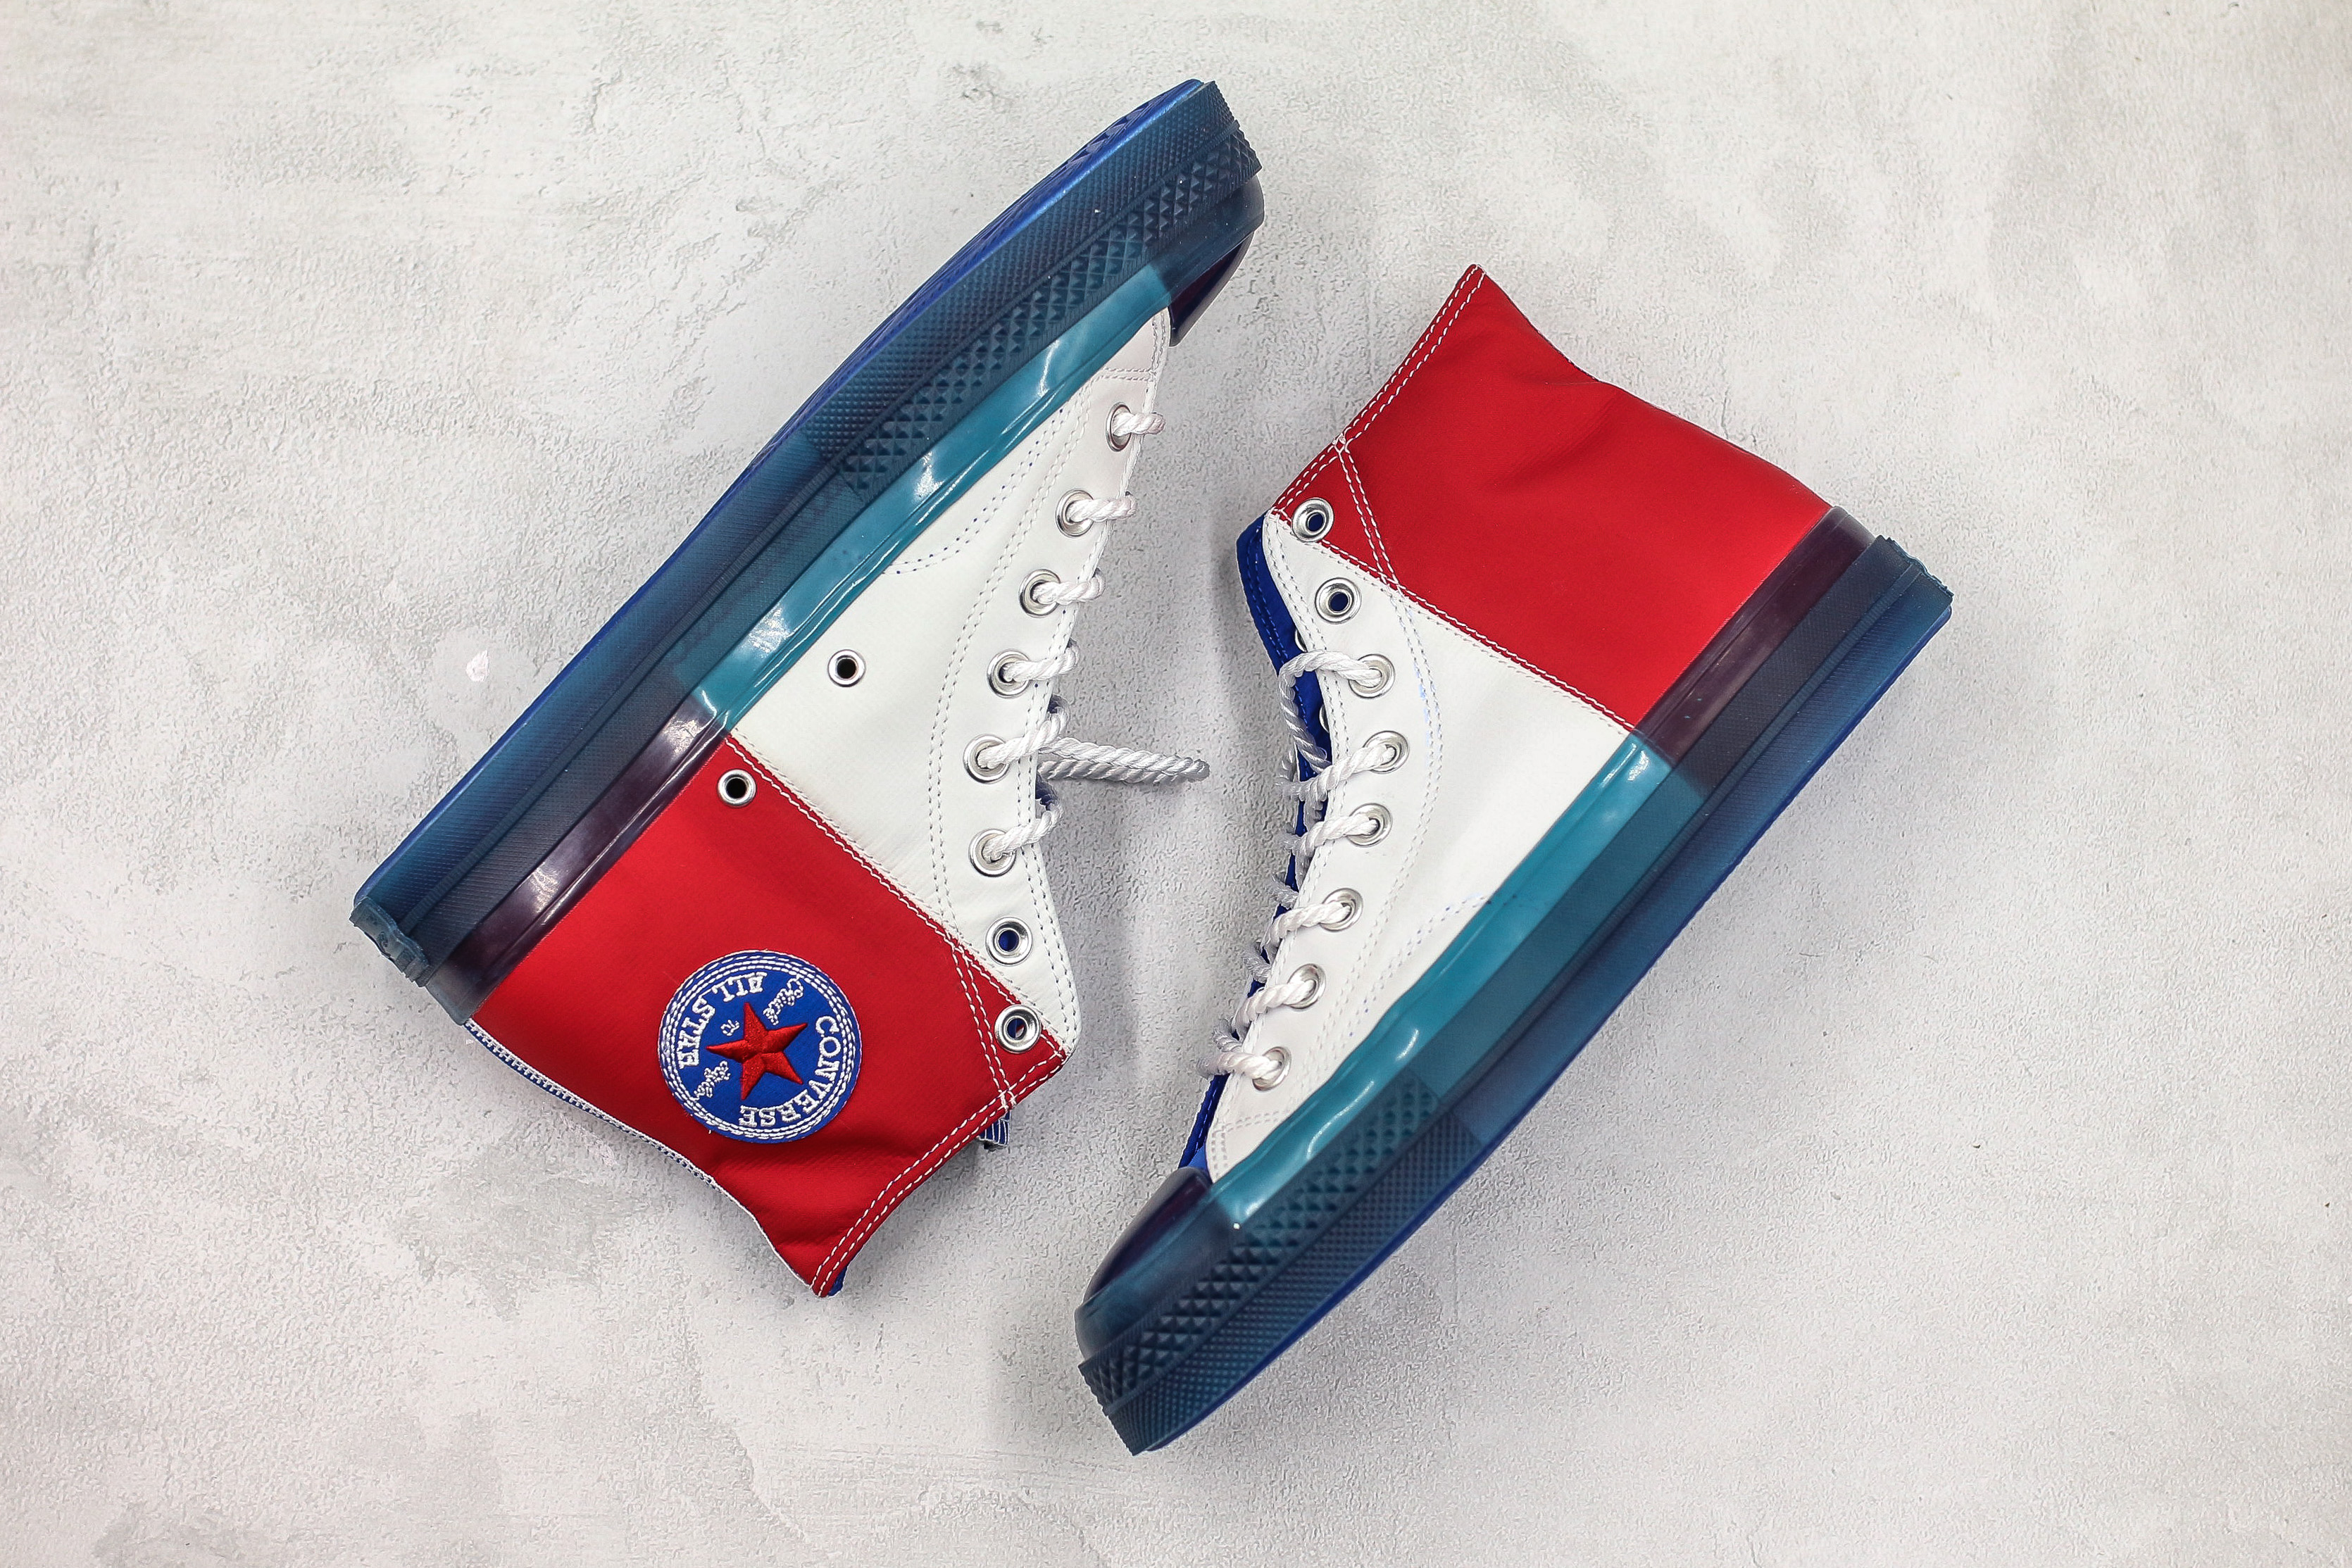 converse high tops red white and blue